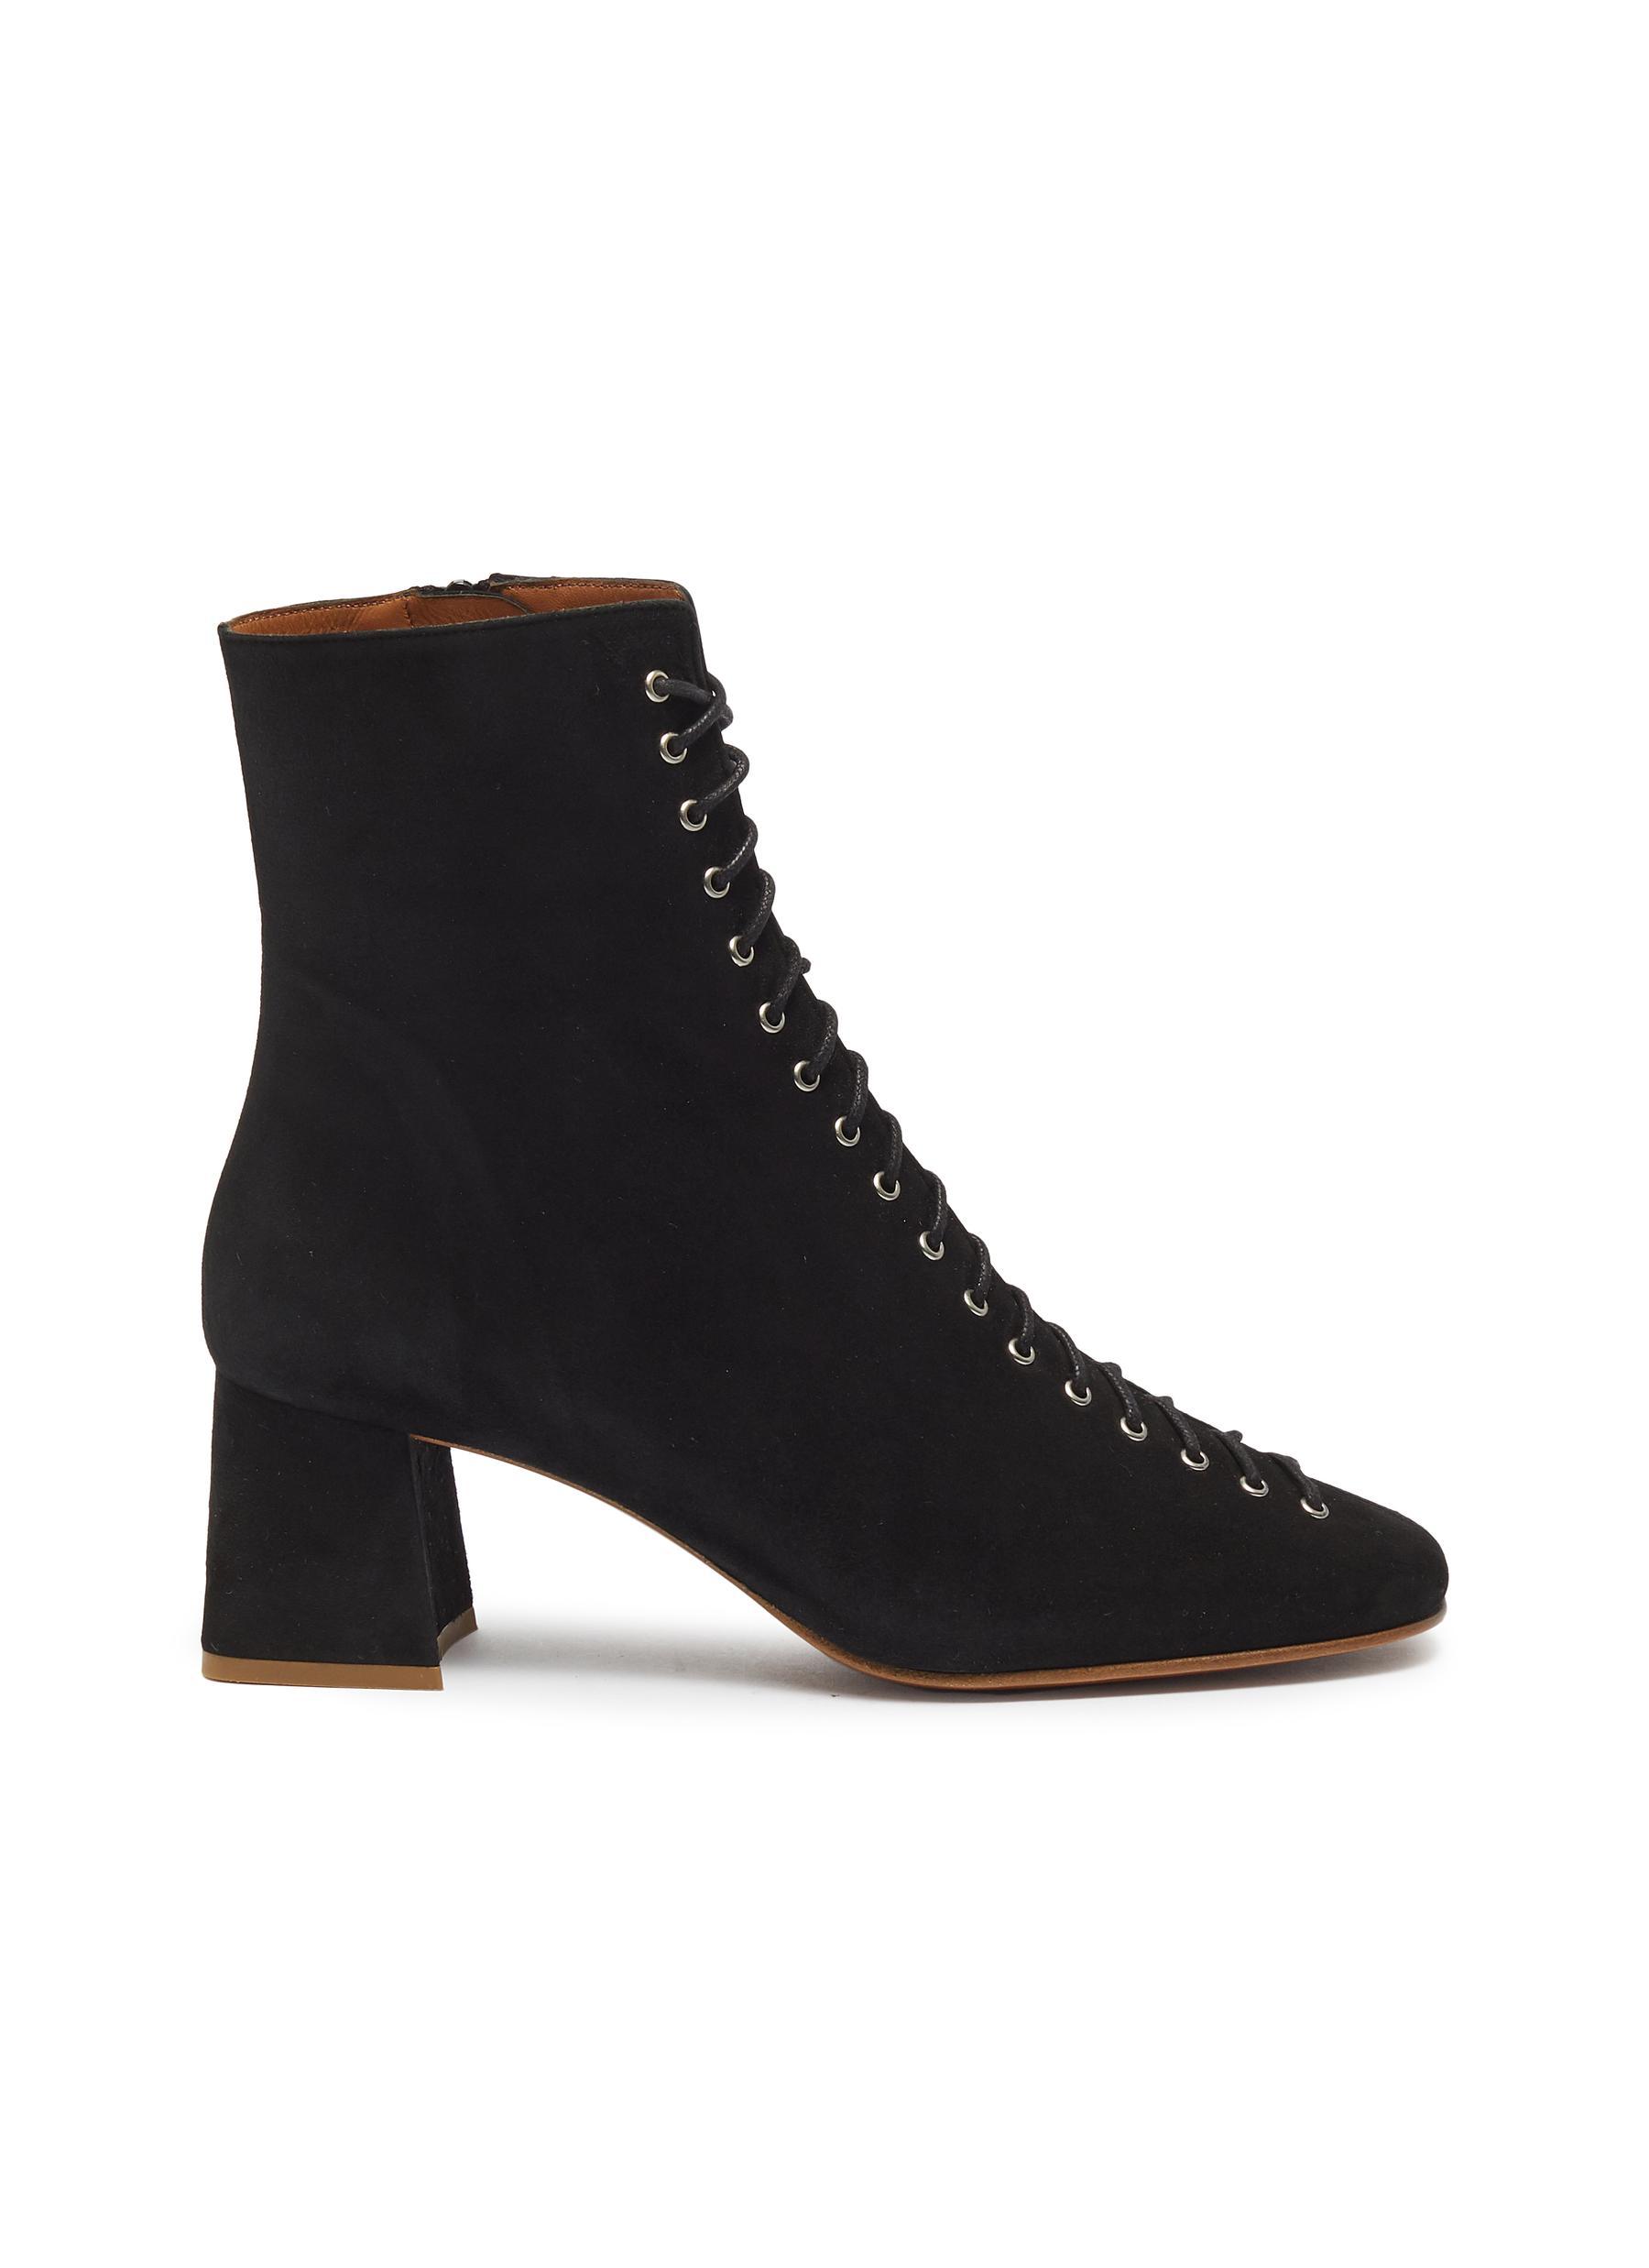 BY FAR Suede Lace Up Ankle Boots in Black Suede (Black) | Lyst